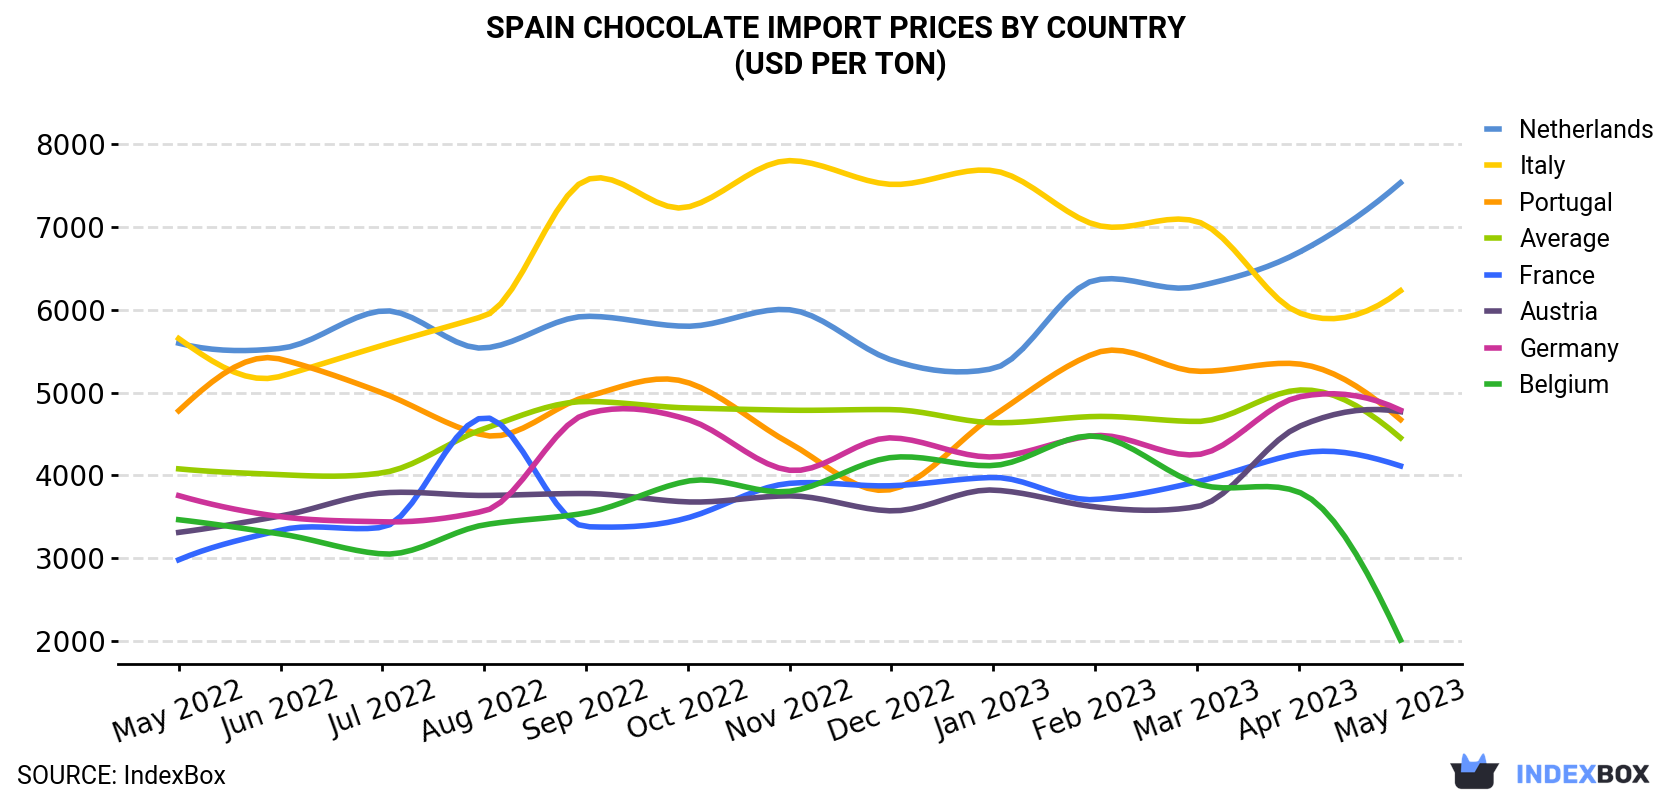 Spain Chocolate Import Prices By Country (USD Per Ton)